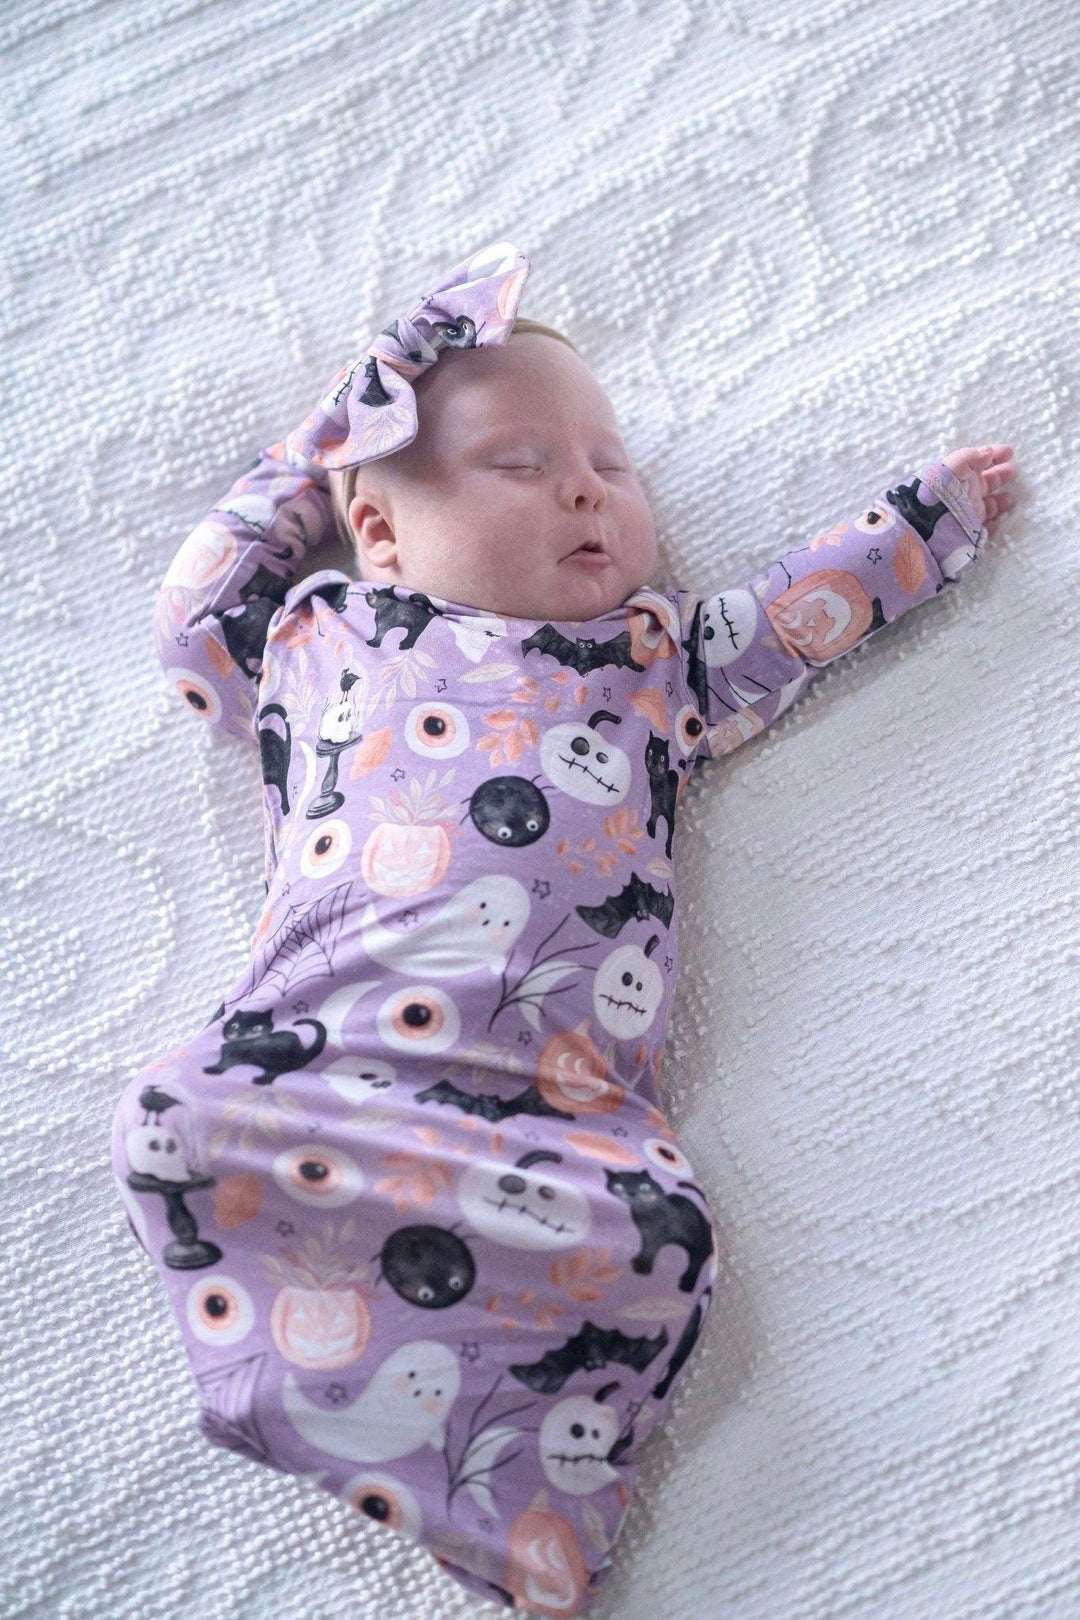 Celebrate Baby's First Halloween with our festive Newborn Knotted Gown